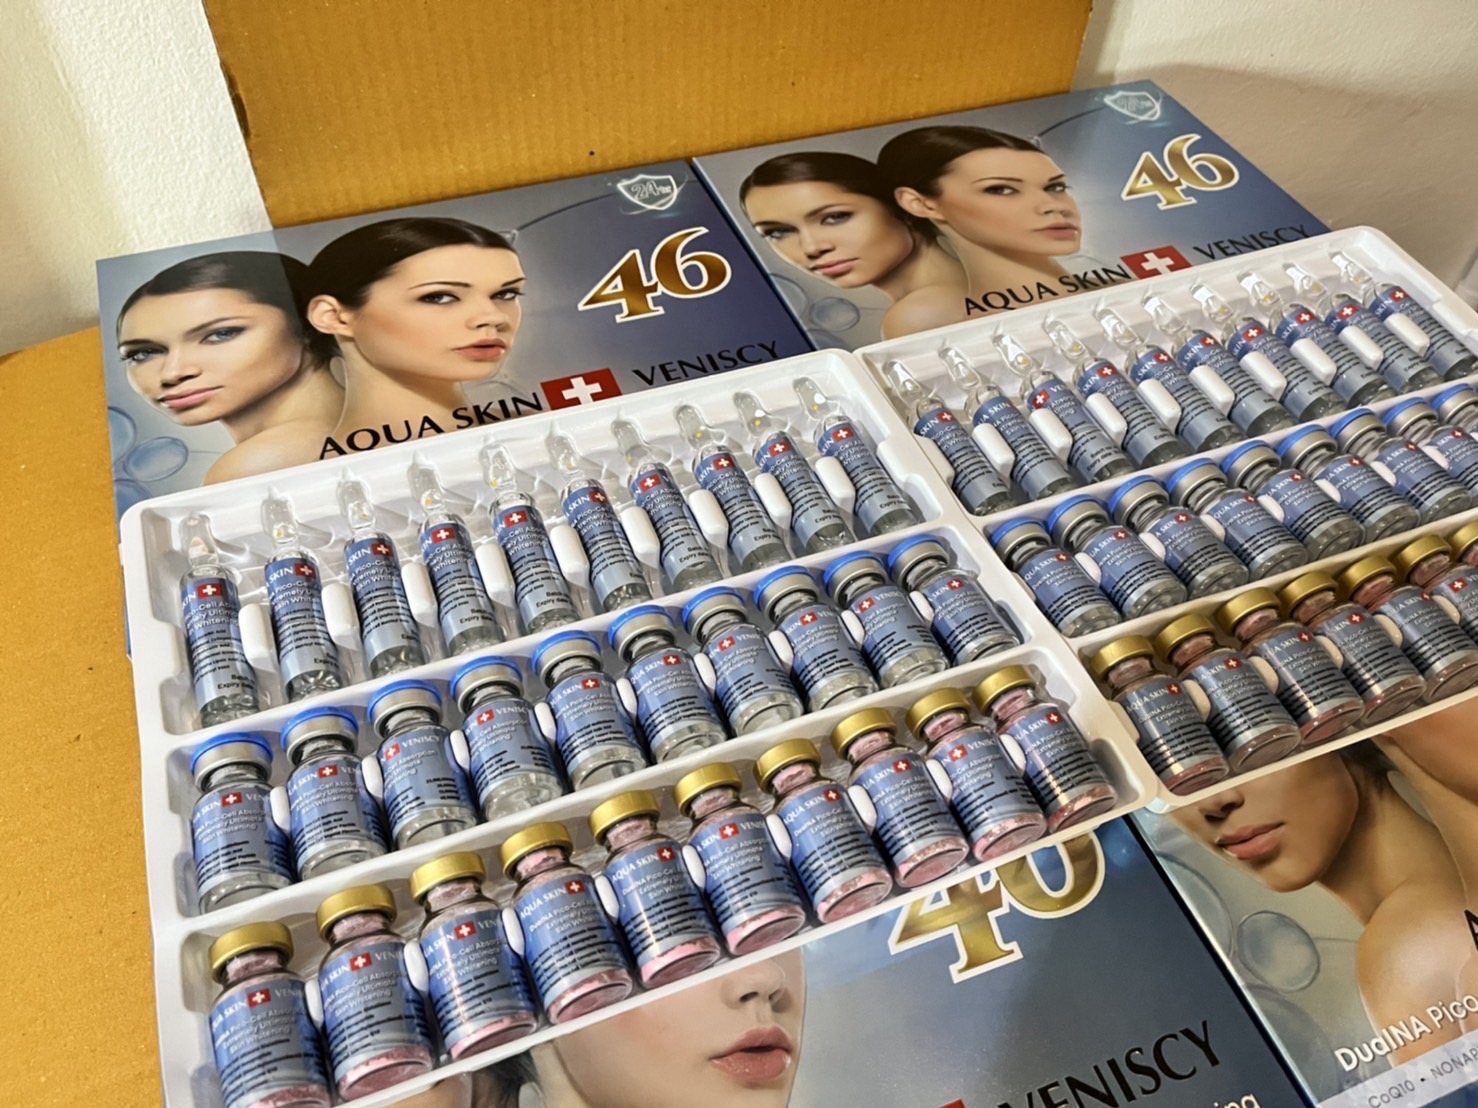 NEW!! AQUA SKIN VENISCY 46 (SWISS) DUALNA PICO-CELL ABSORPTION EXTREMELY ULTIMATE SKIN WHITENING INJECTION by "www.ccthaitown.com"